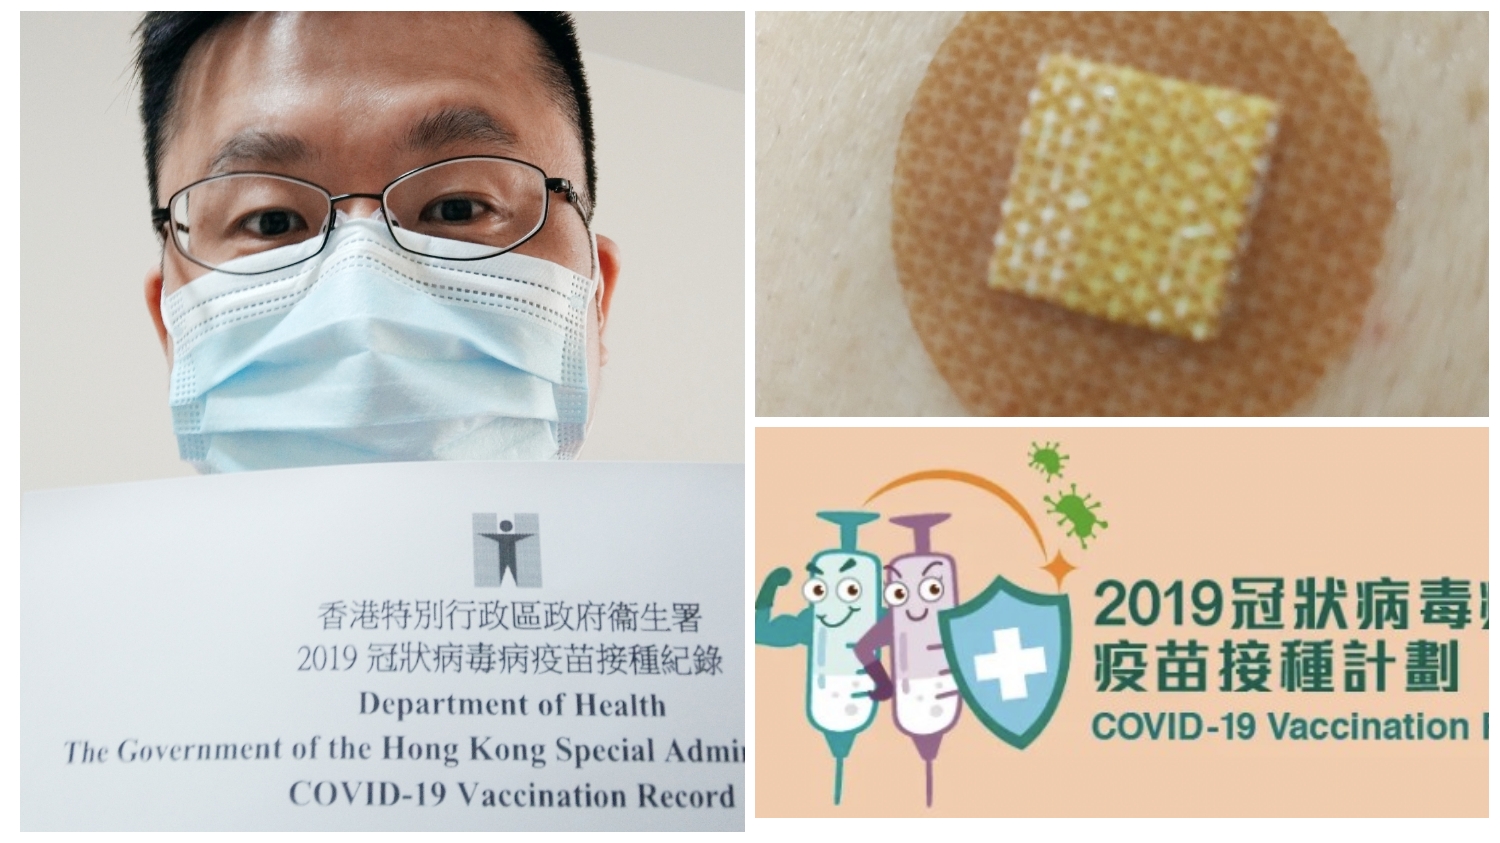 Frank with vaccine record, adhesive bandage, vaccination programme logo